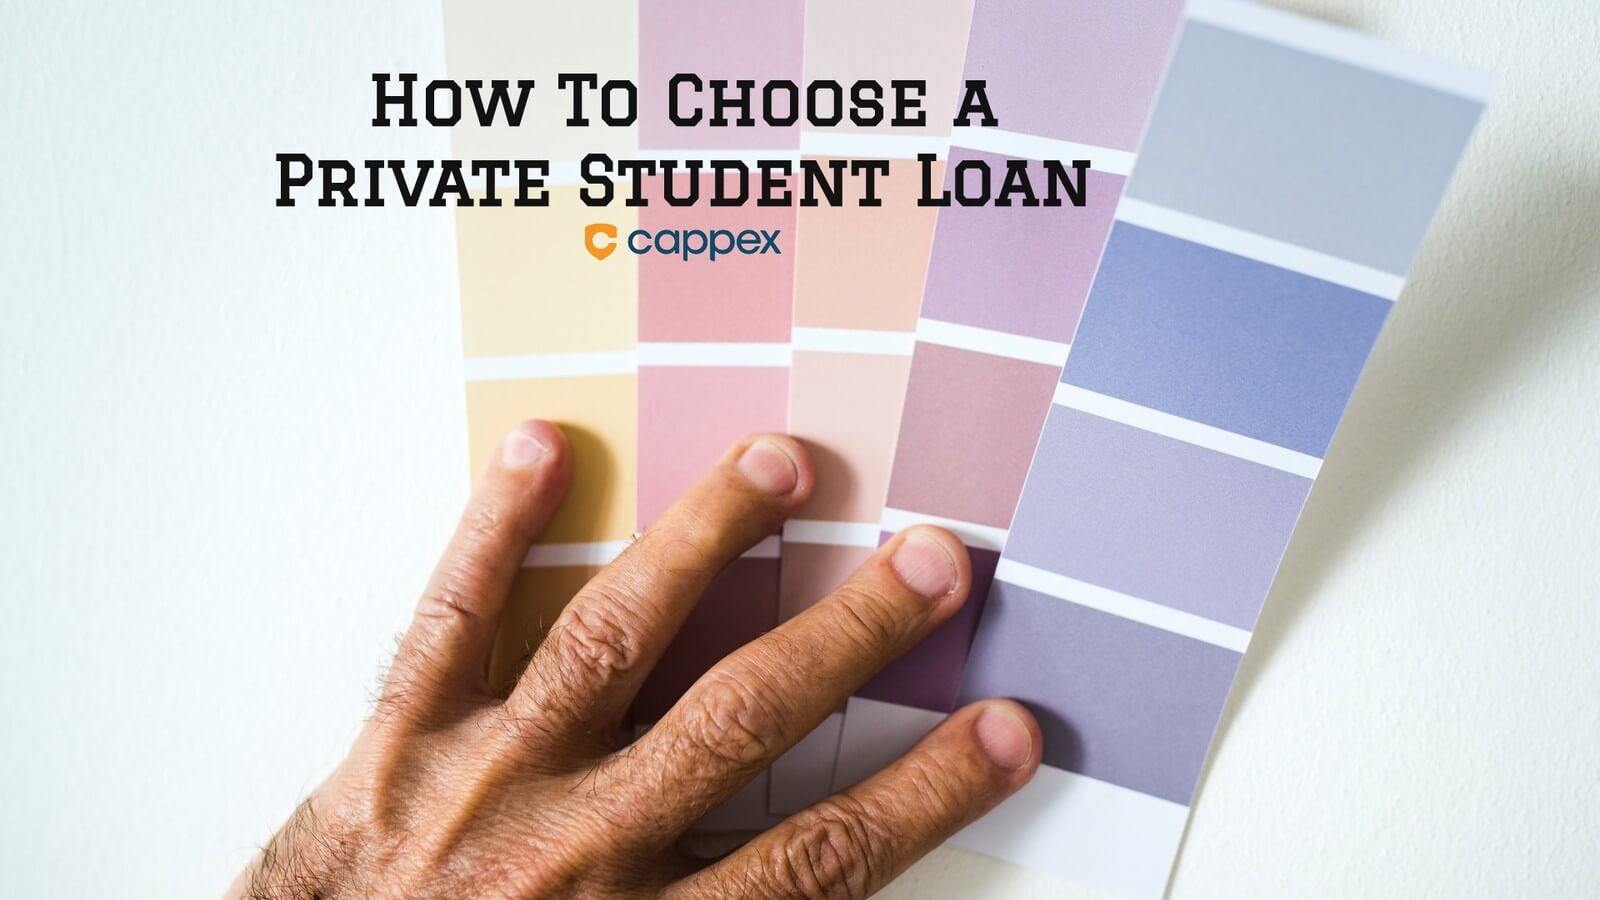 How to Choose a Private Student Loan